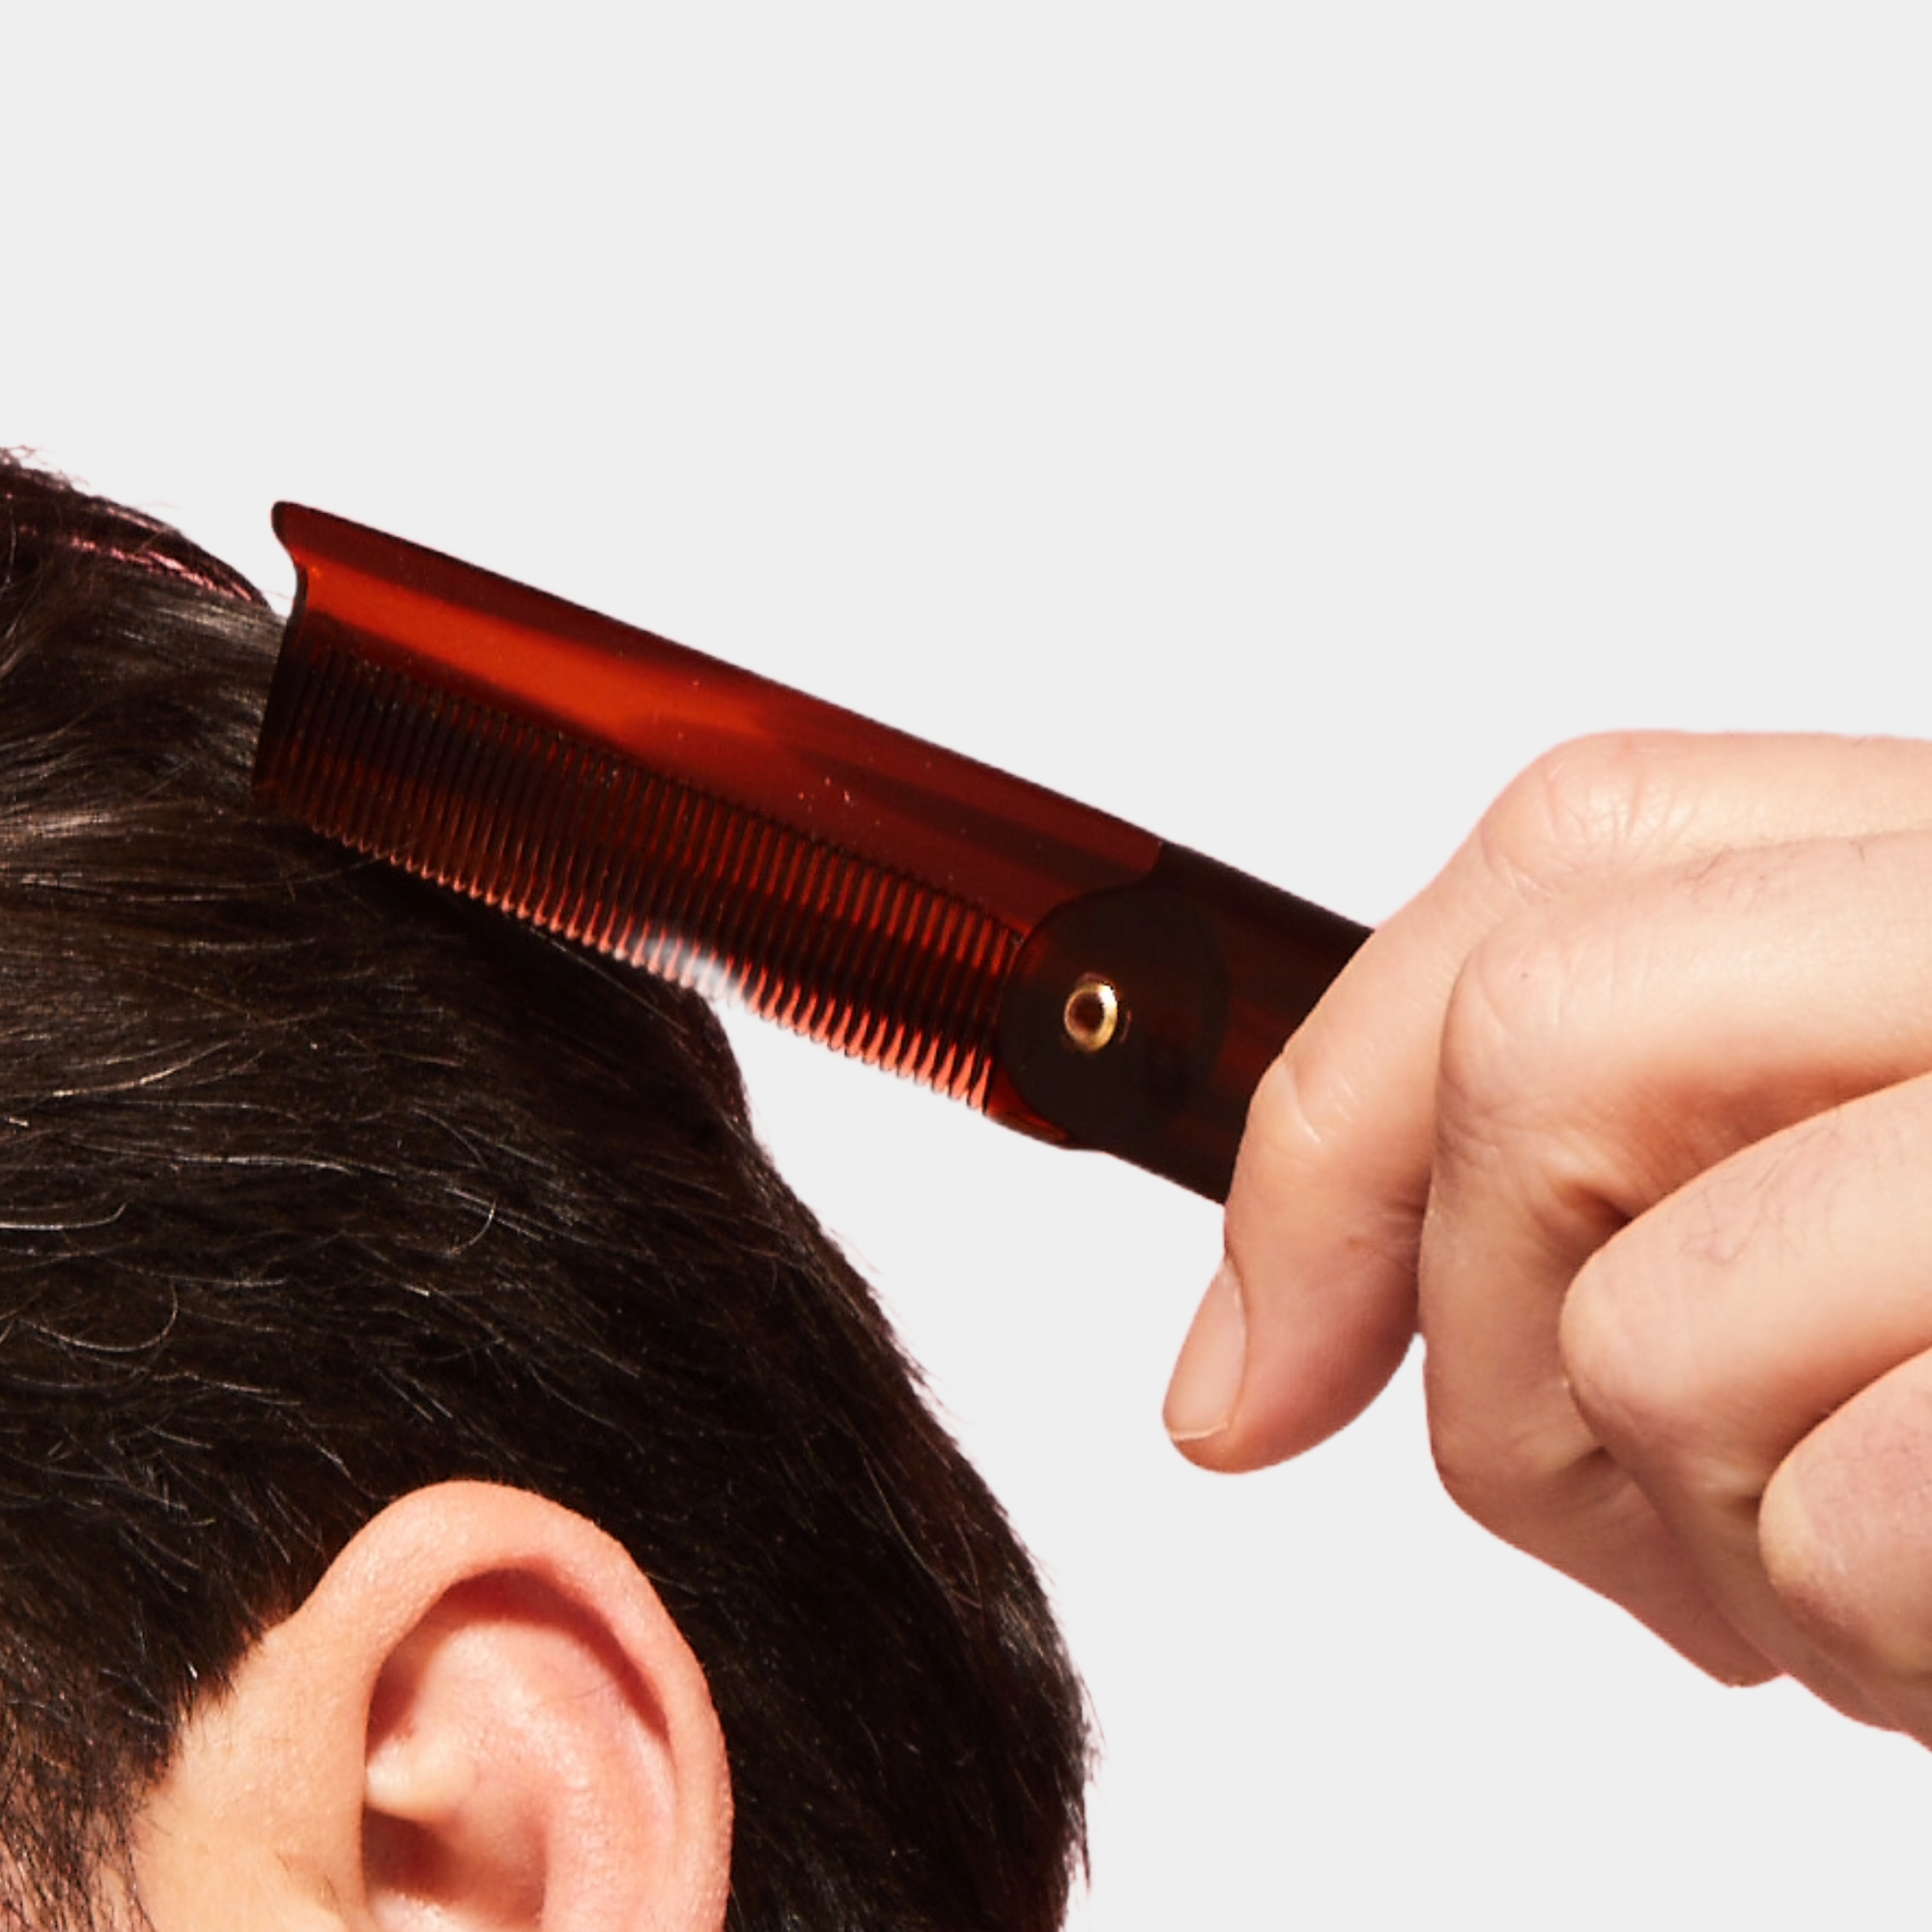 Caswell-Massey Folding Pocket Comb: man shown combing hair